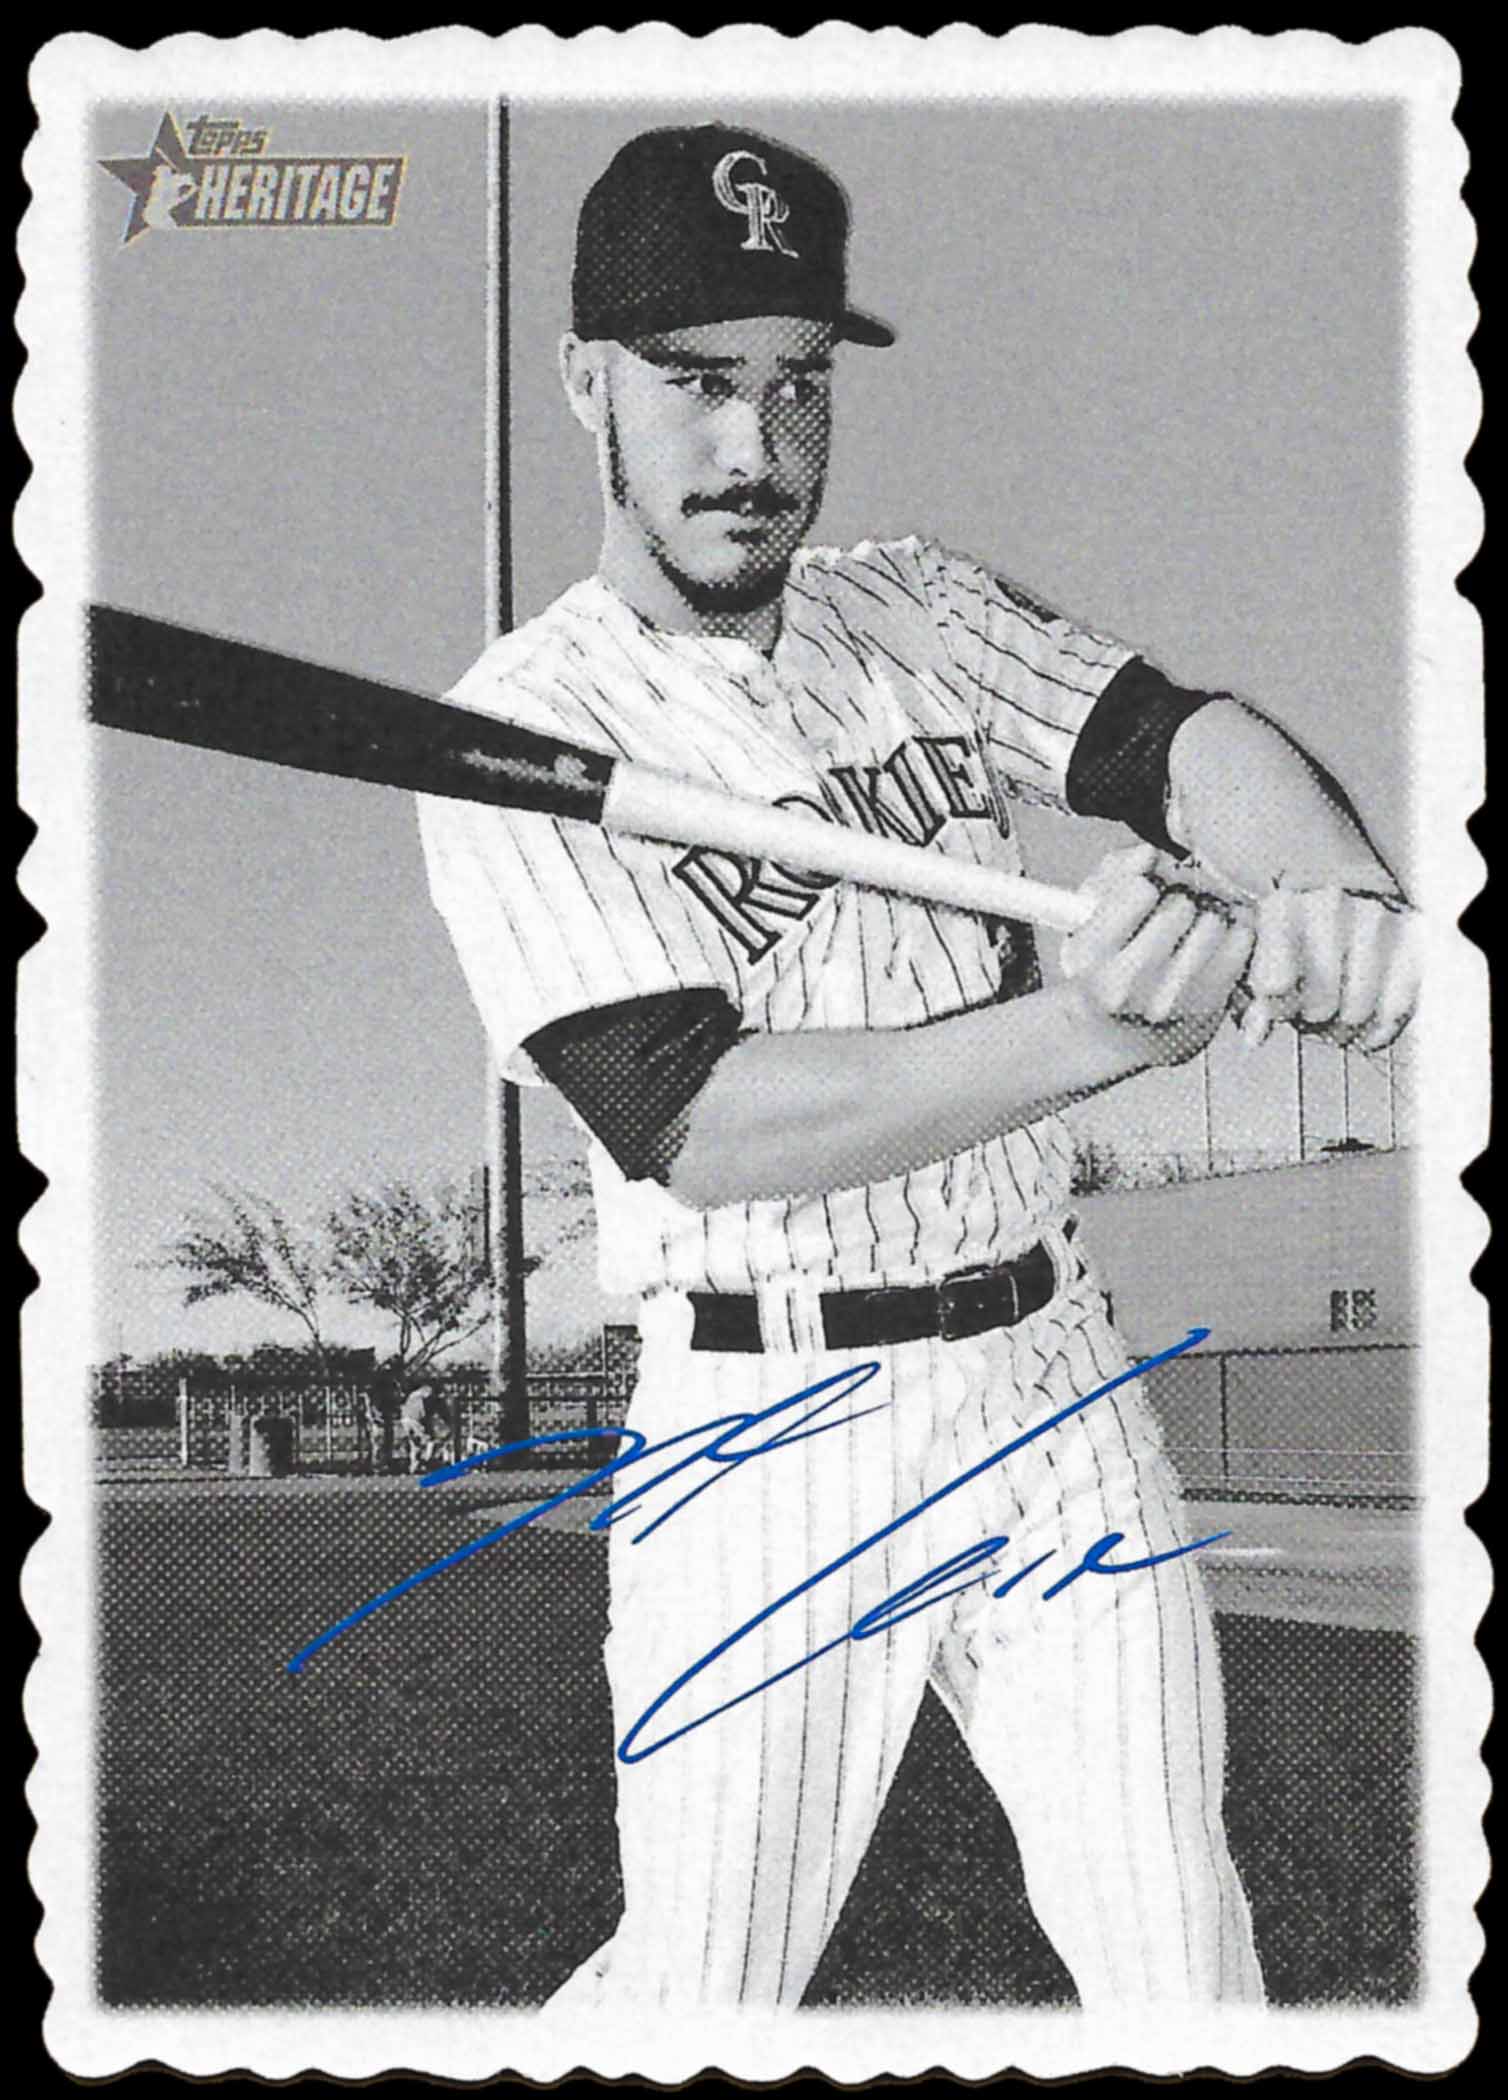 2018 Topps Heritage '69 Topps Deckle Edge